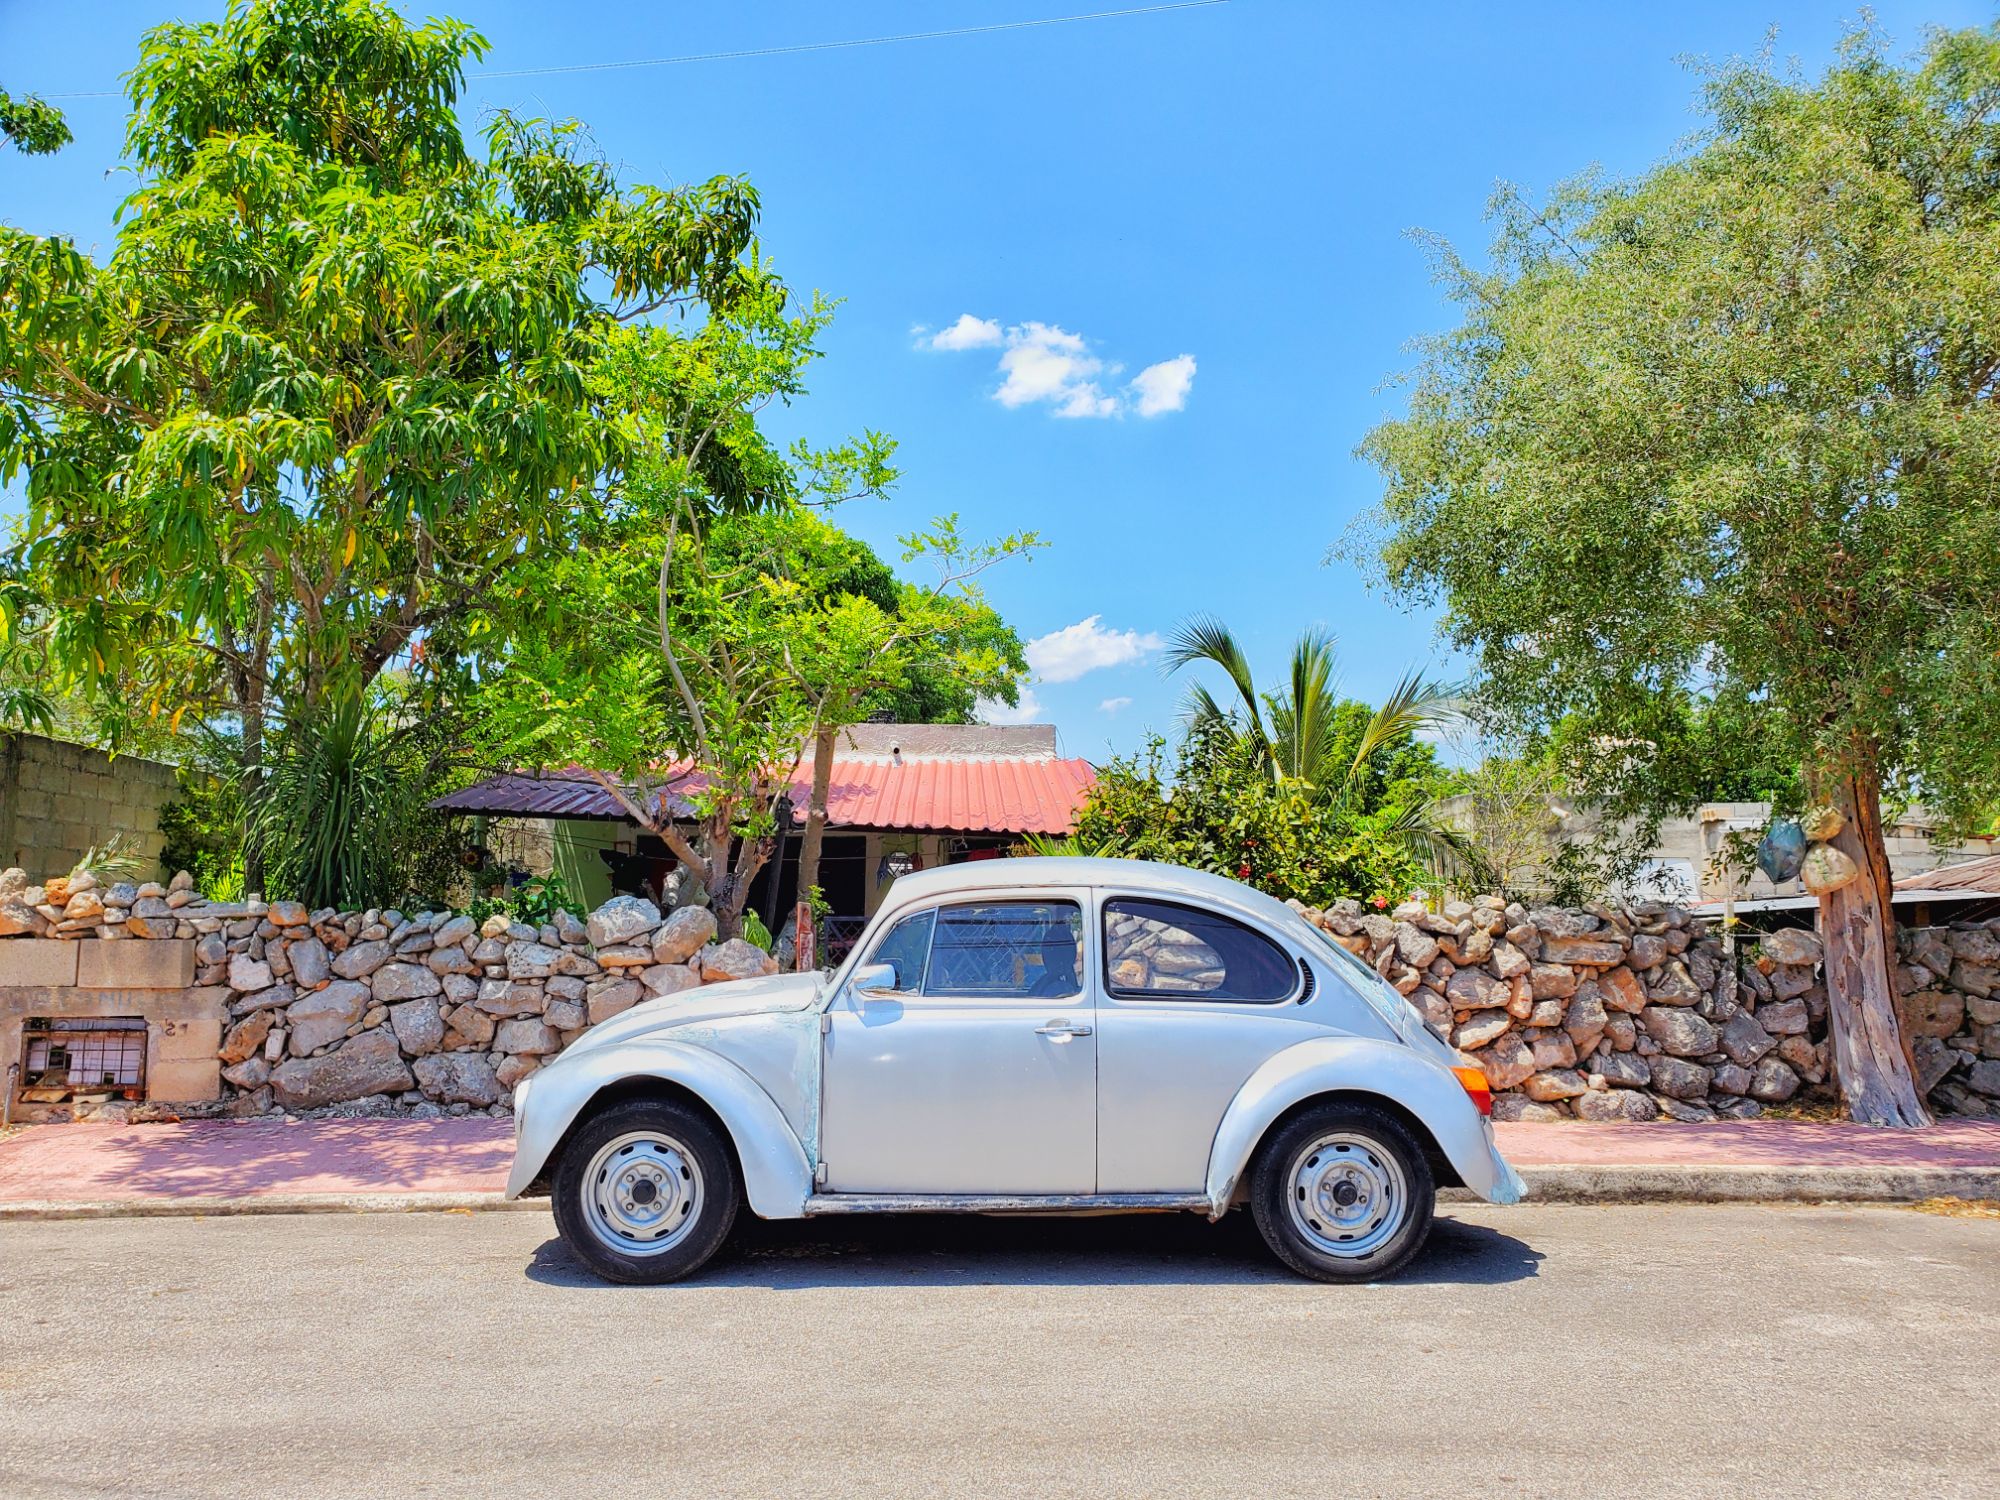 white vw in front of a stone wall, trees, red roof house and blue sky